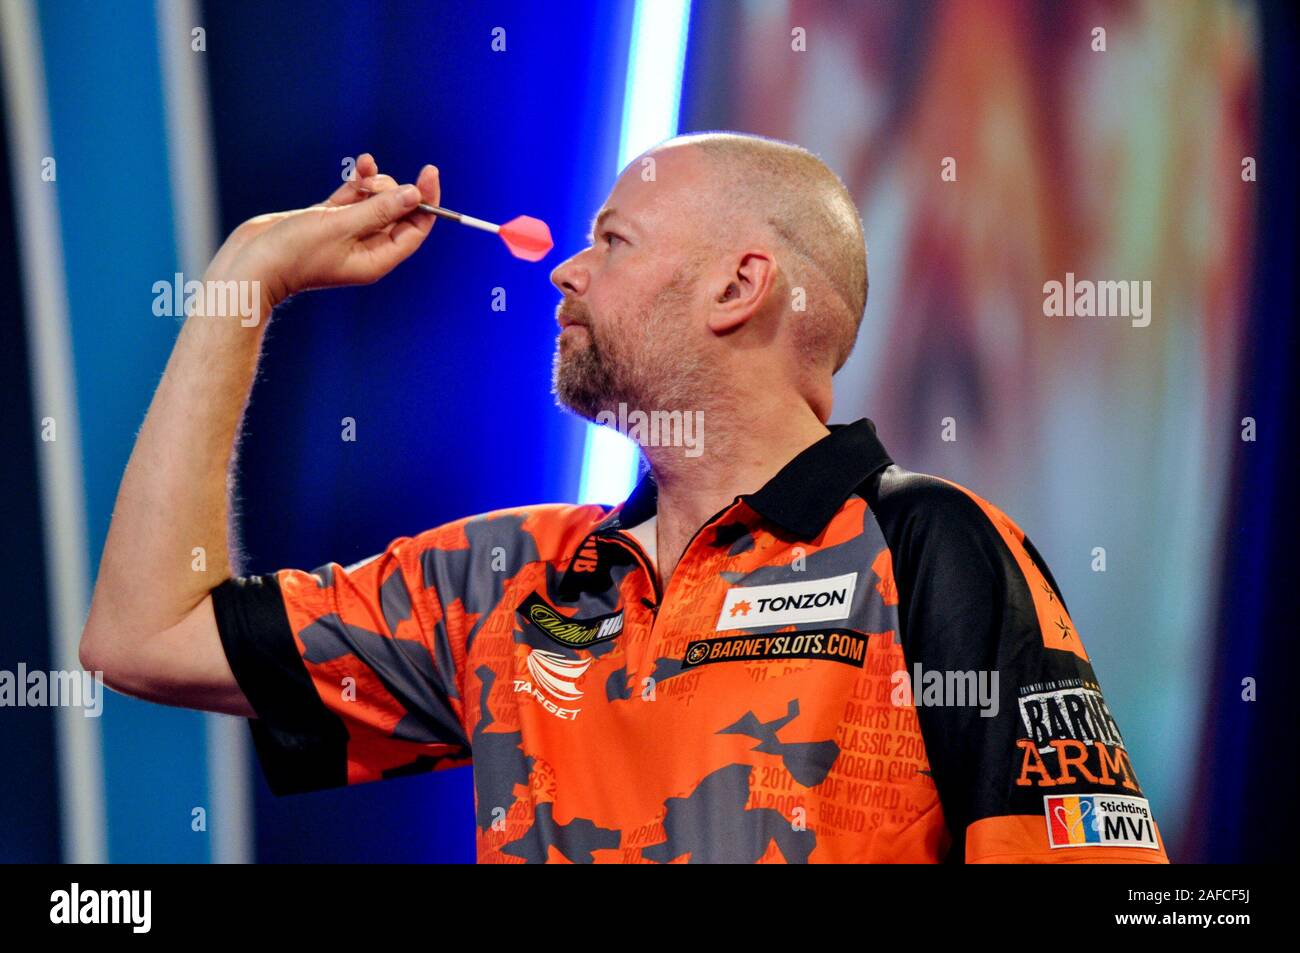 ophobe sejle Justerbar 14 december 2019 London, Great Britain William Hill World Darts  Championship Raymond van Barneveld during day 2 of the William Hill World  Darts Championship of darts at Alexandra Palace (Ally Pally) in